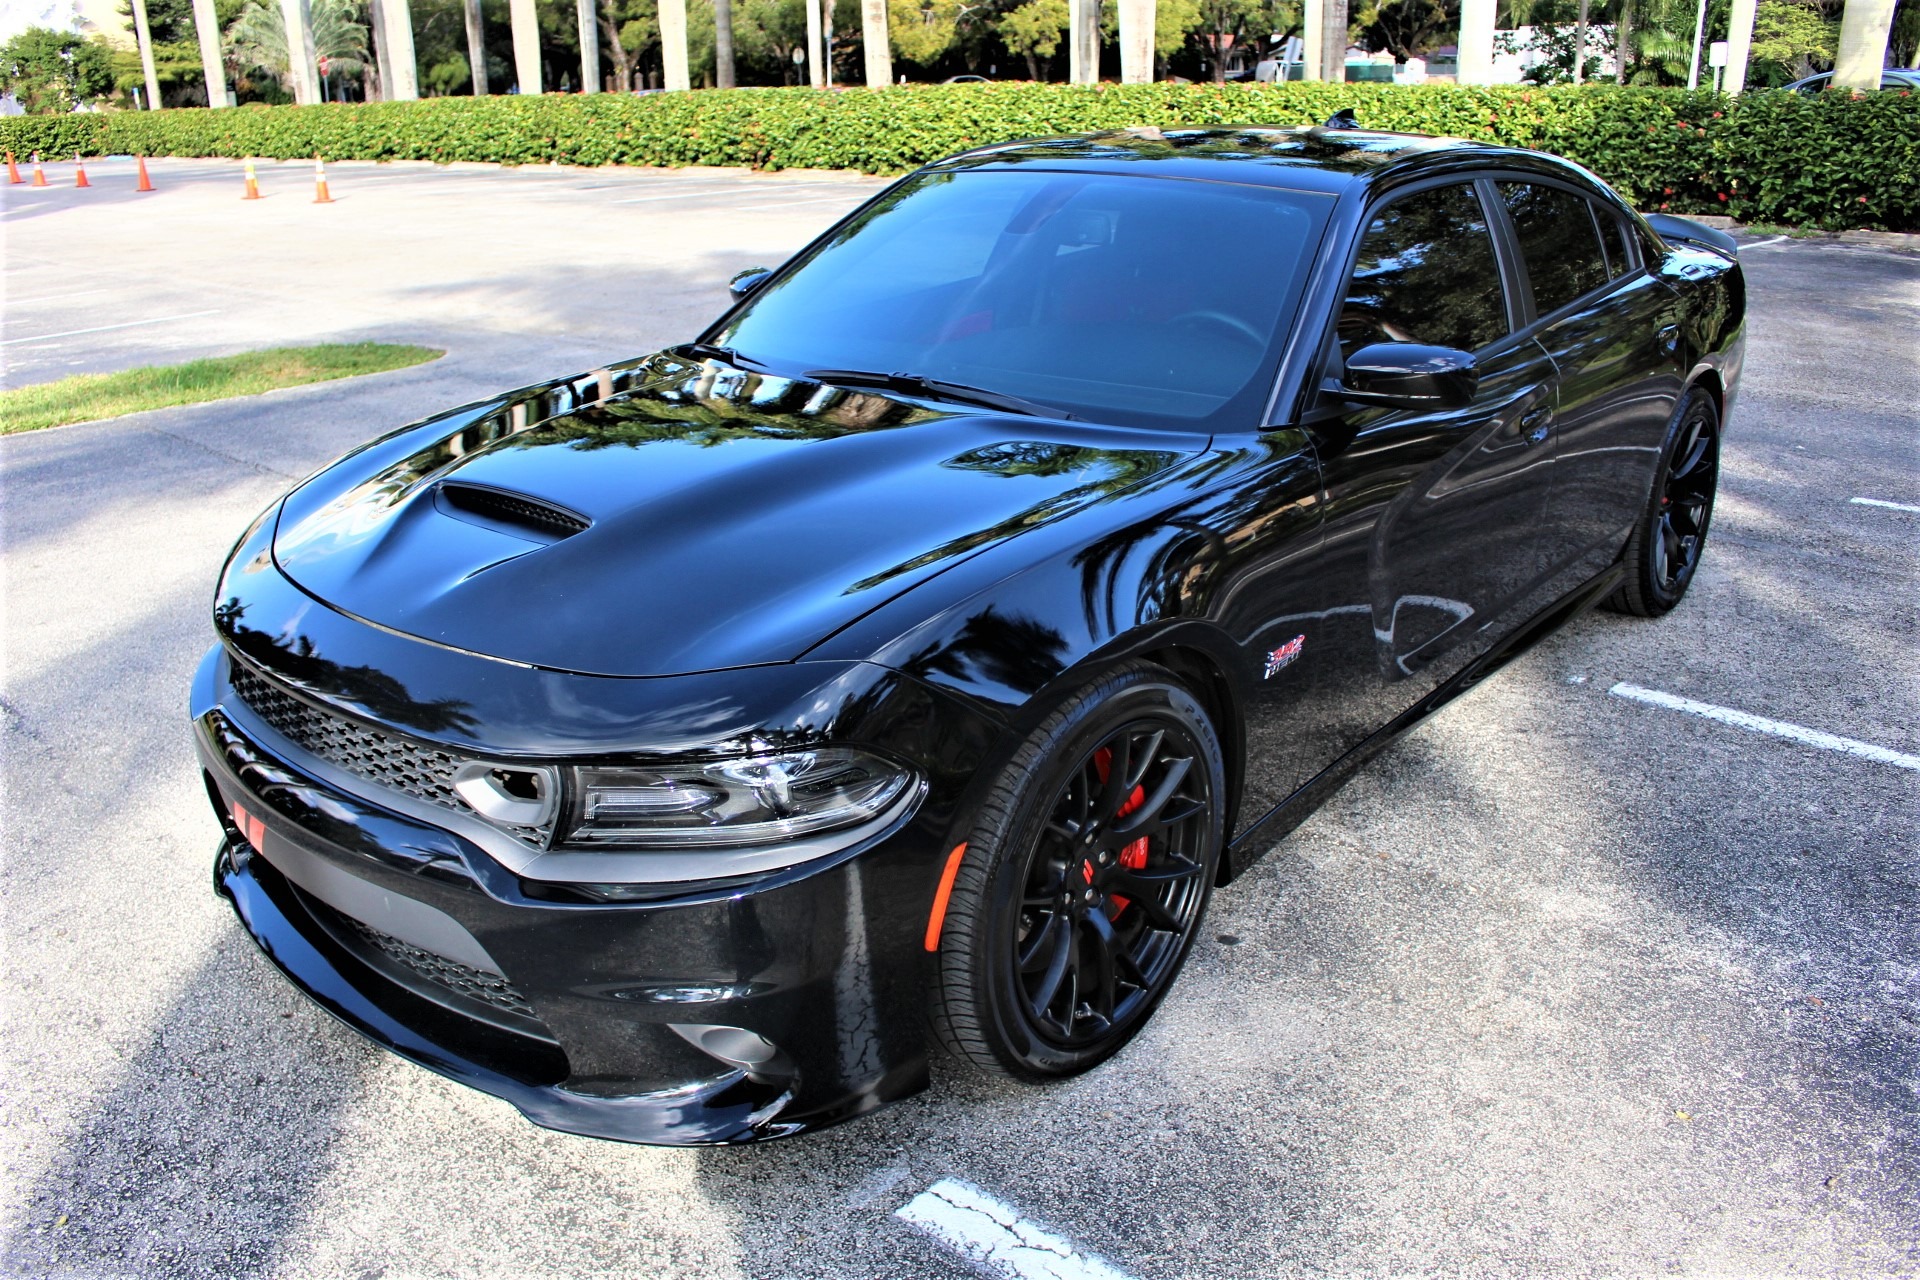 Used 2019 Dodge Charger R/T Scat Pack For Sale ($35,850) | The Gables  Sports Cars Stock #668031